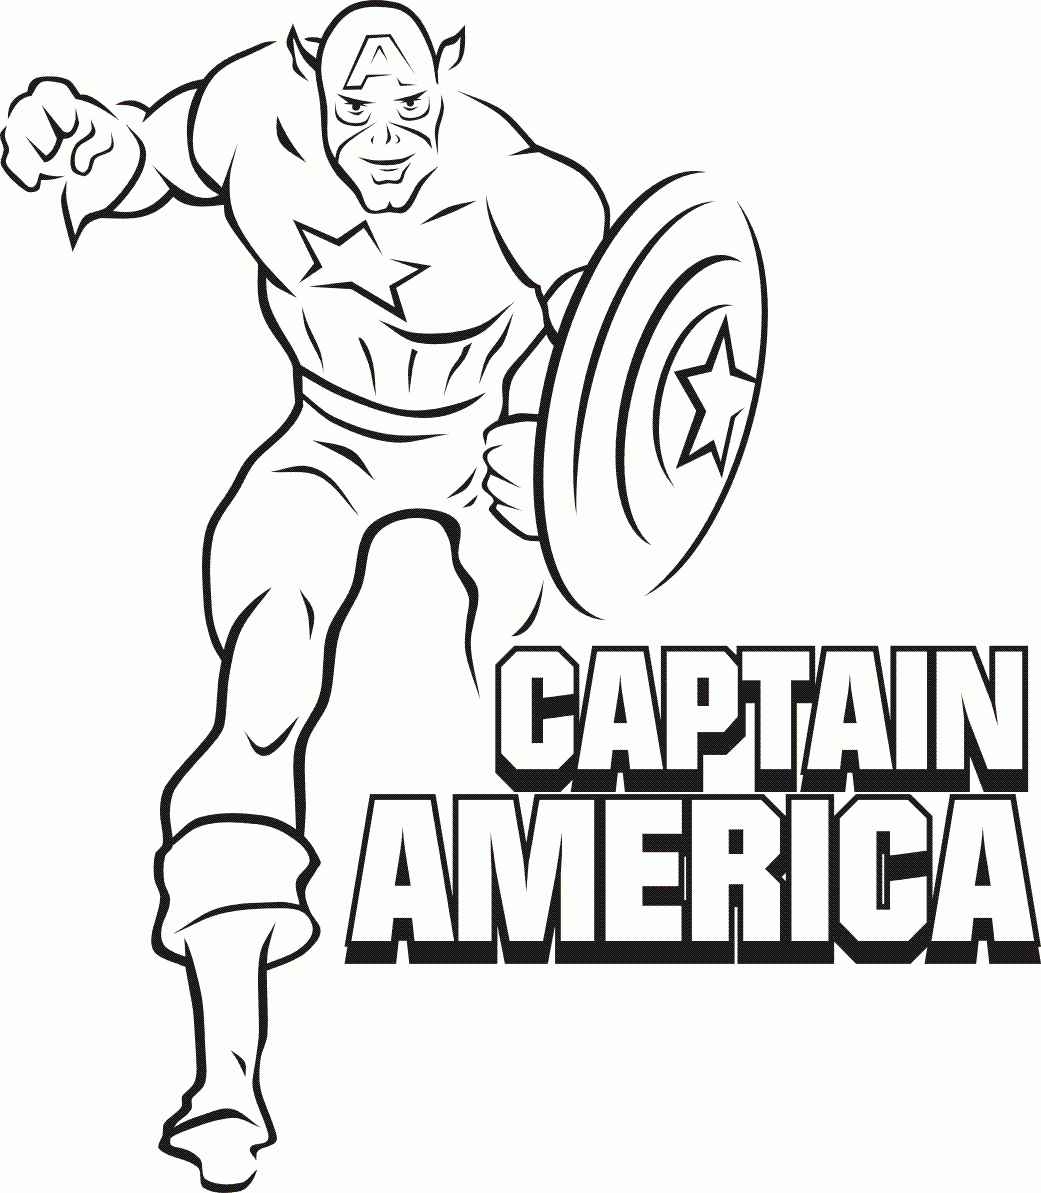 Superhero Coloring Pages To Download And Print For Free | Color - Free Printable Superhero Coloring Pages Pdf